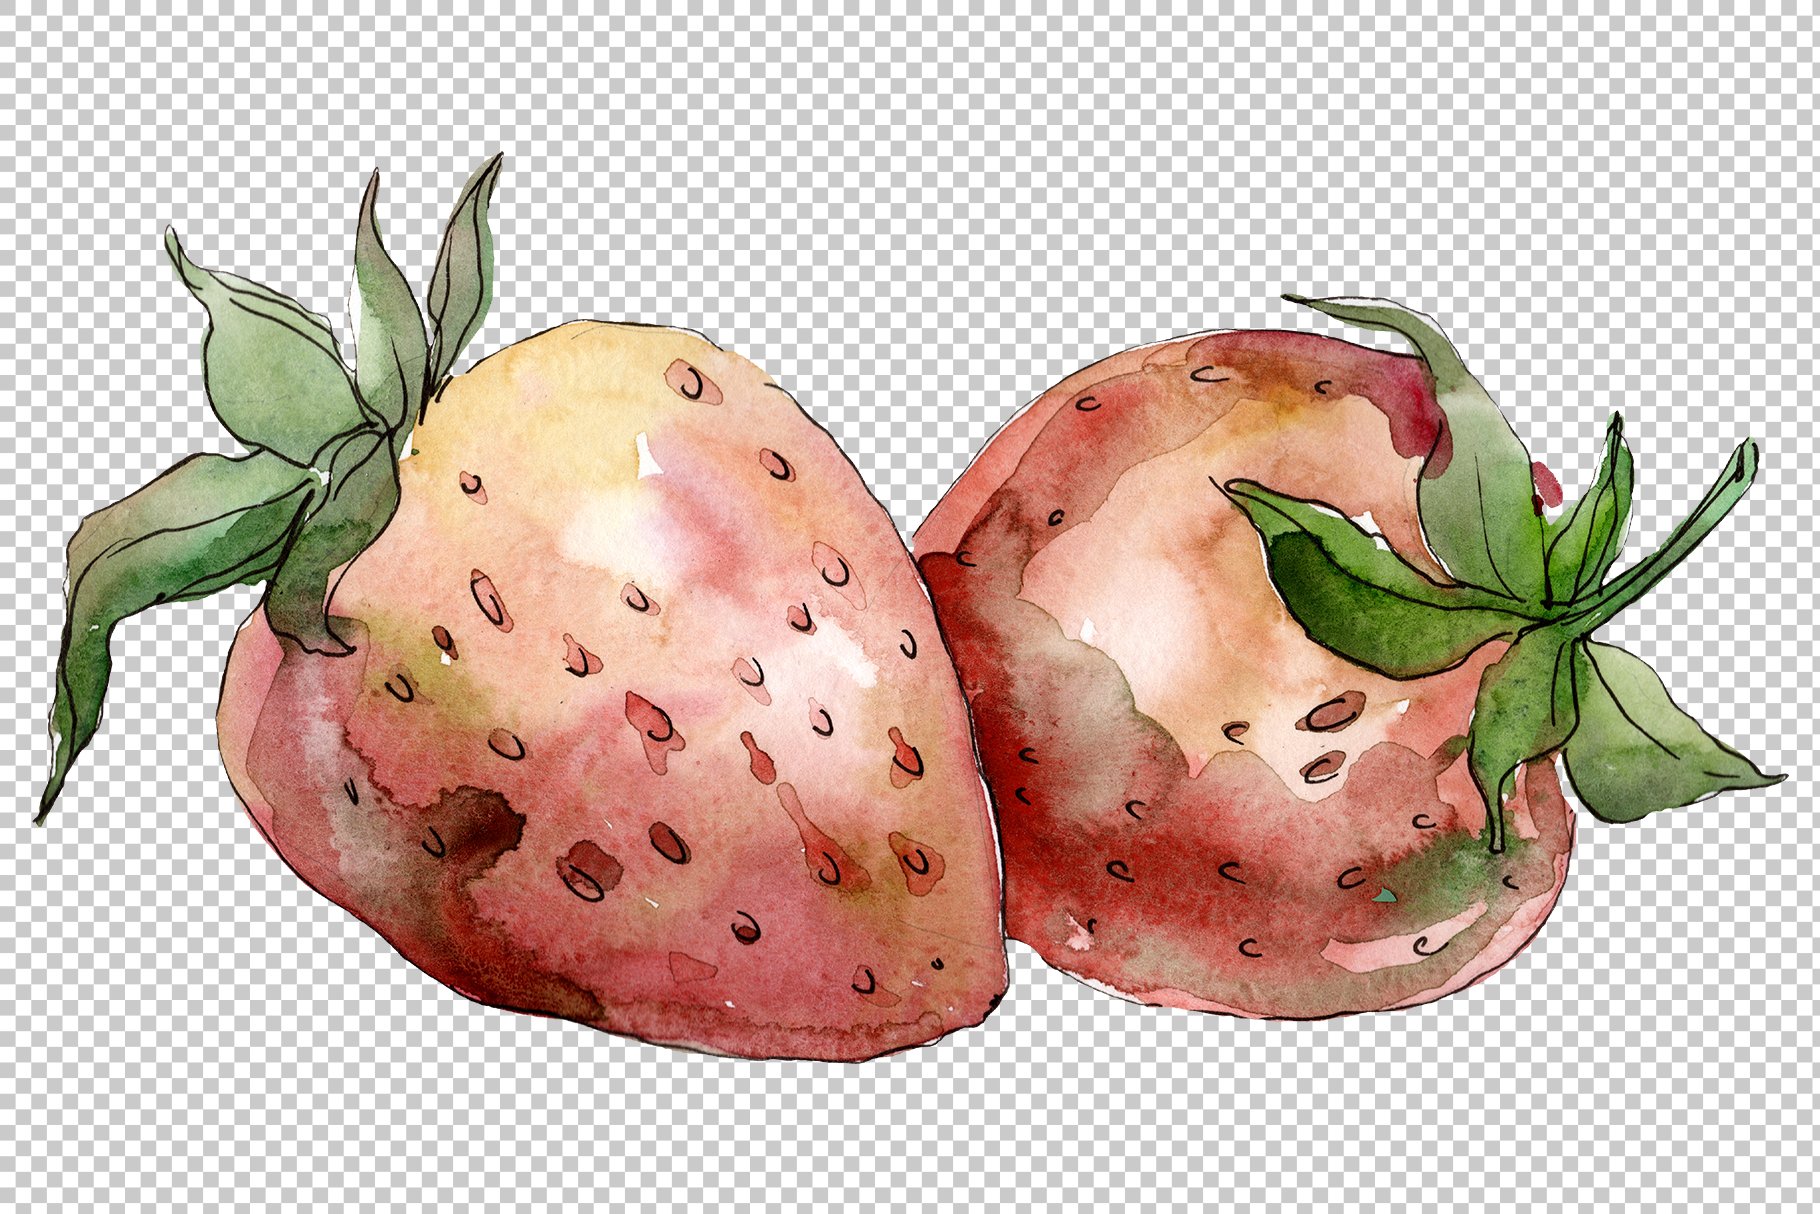 Two old strawberries in a watercolor style.